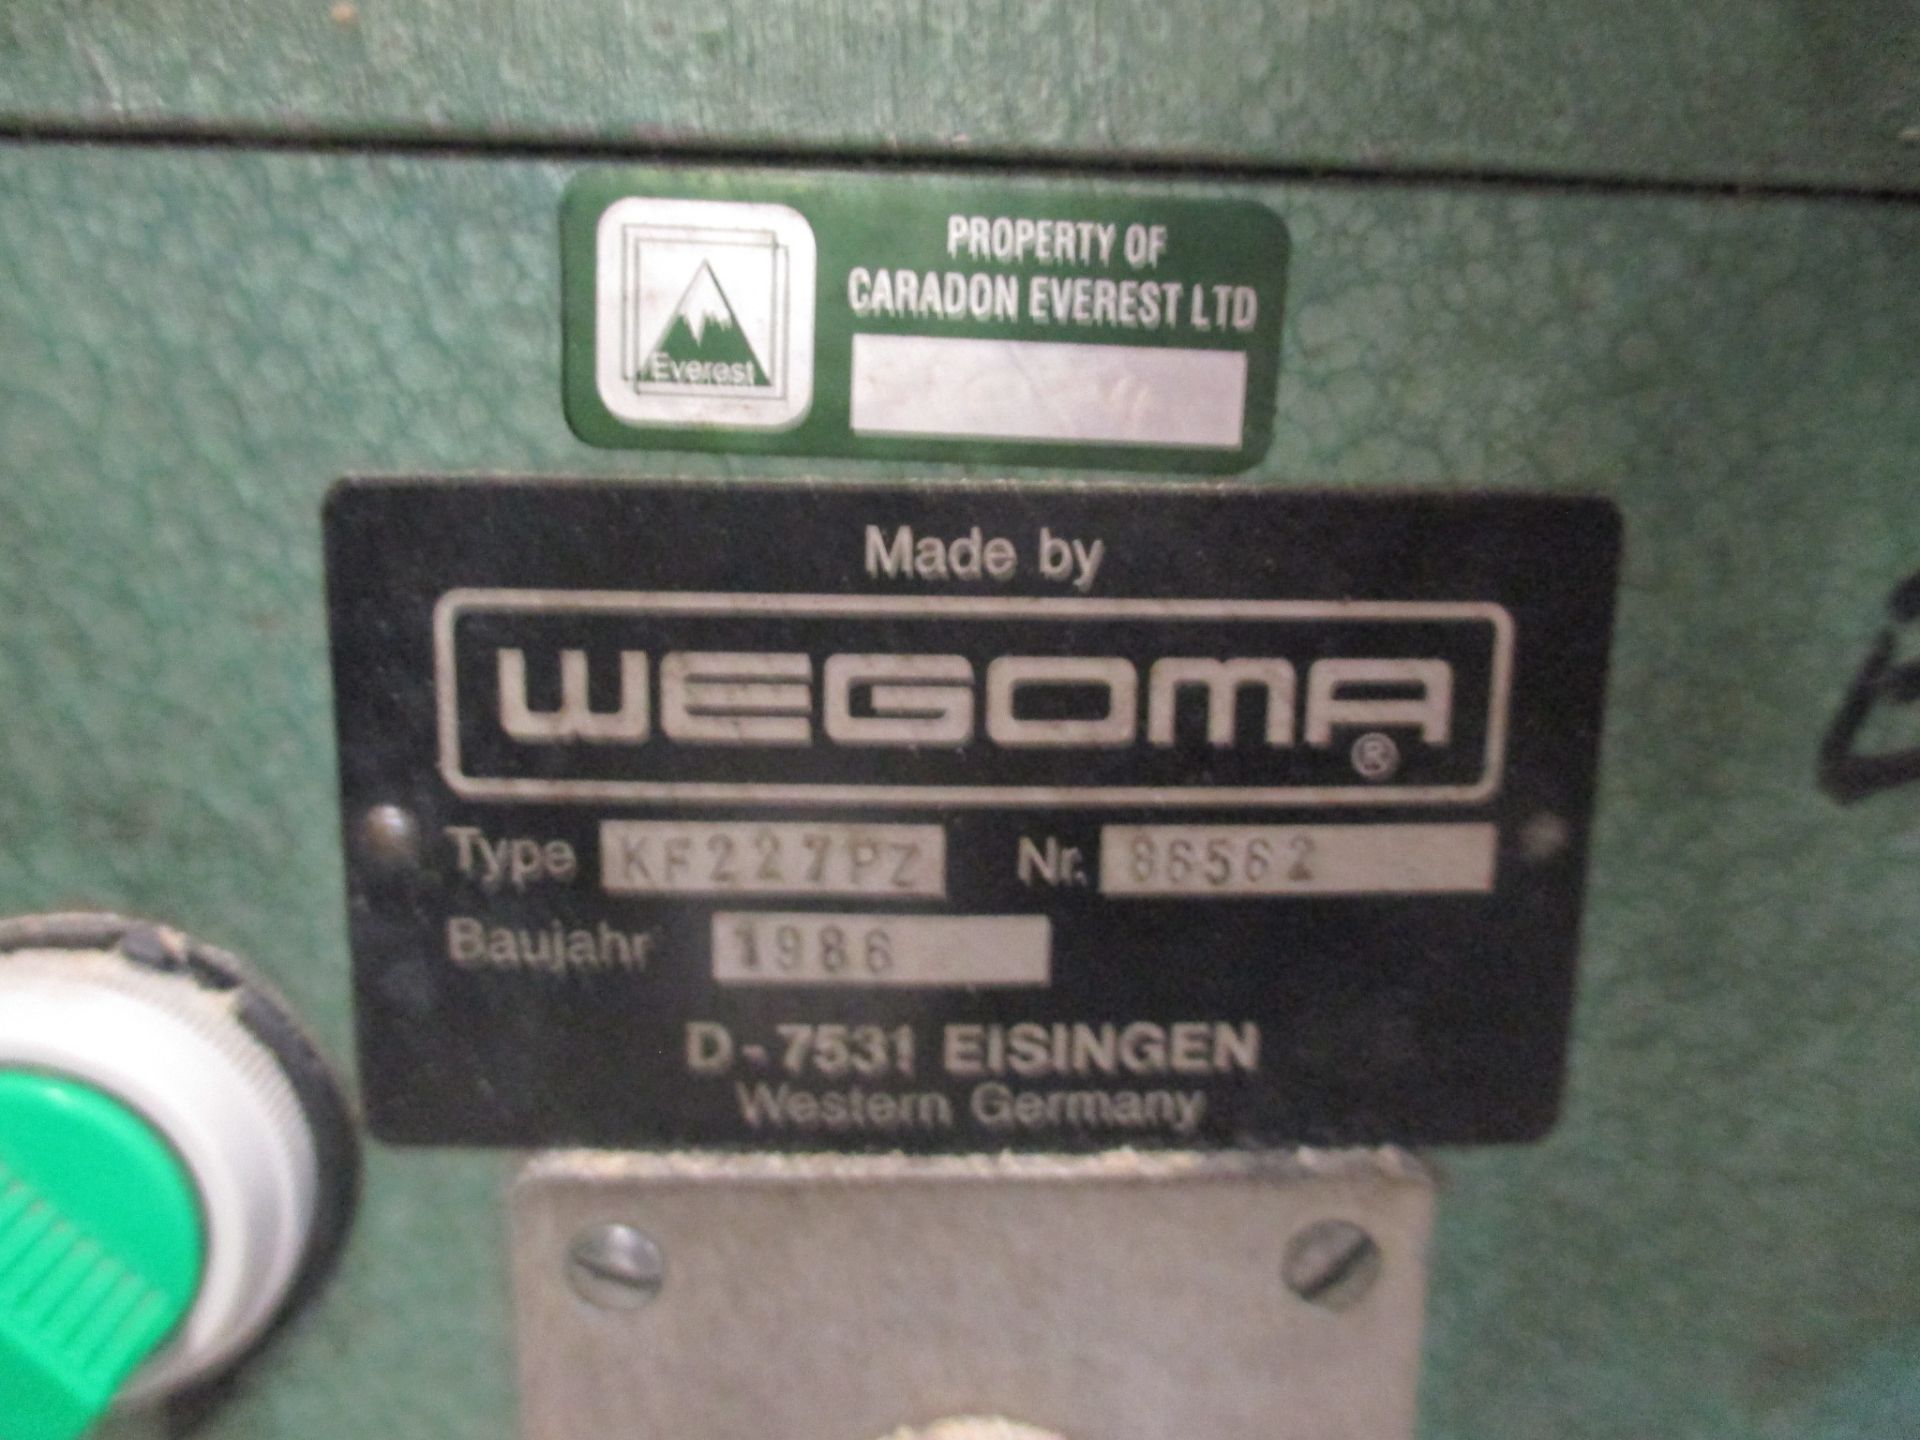 1: Wedoma, KF277 PZ, Copy Router, Serial Number: 86562, Year of Manufacture: 1986 - Image 2 of 2